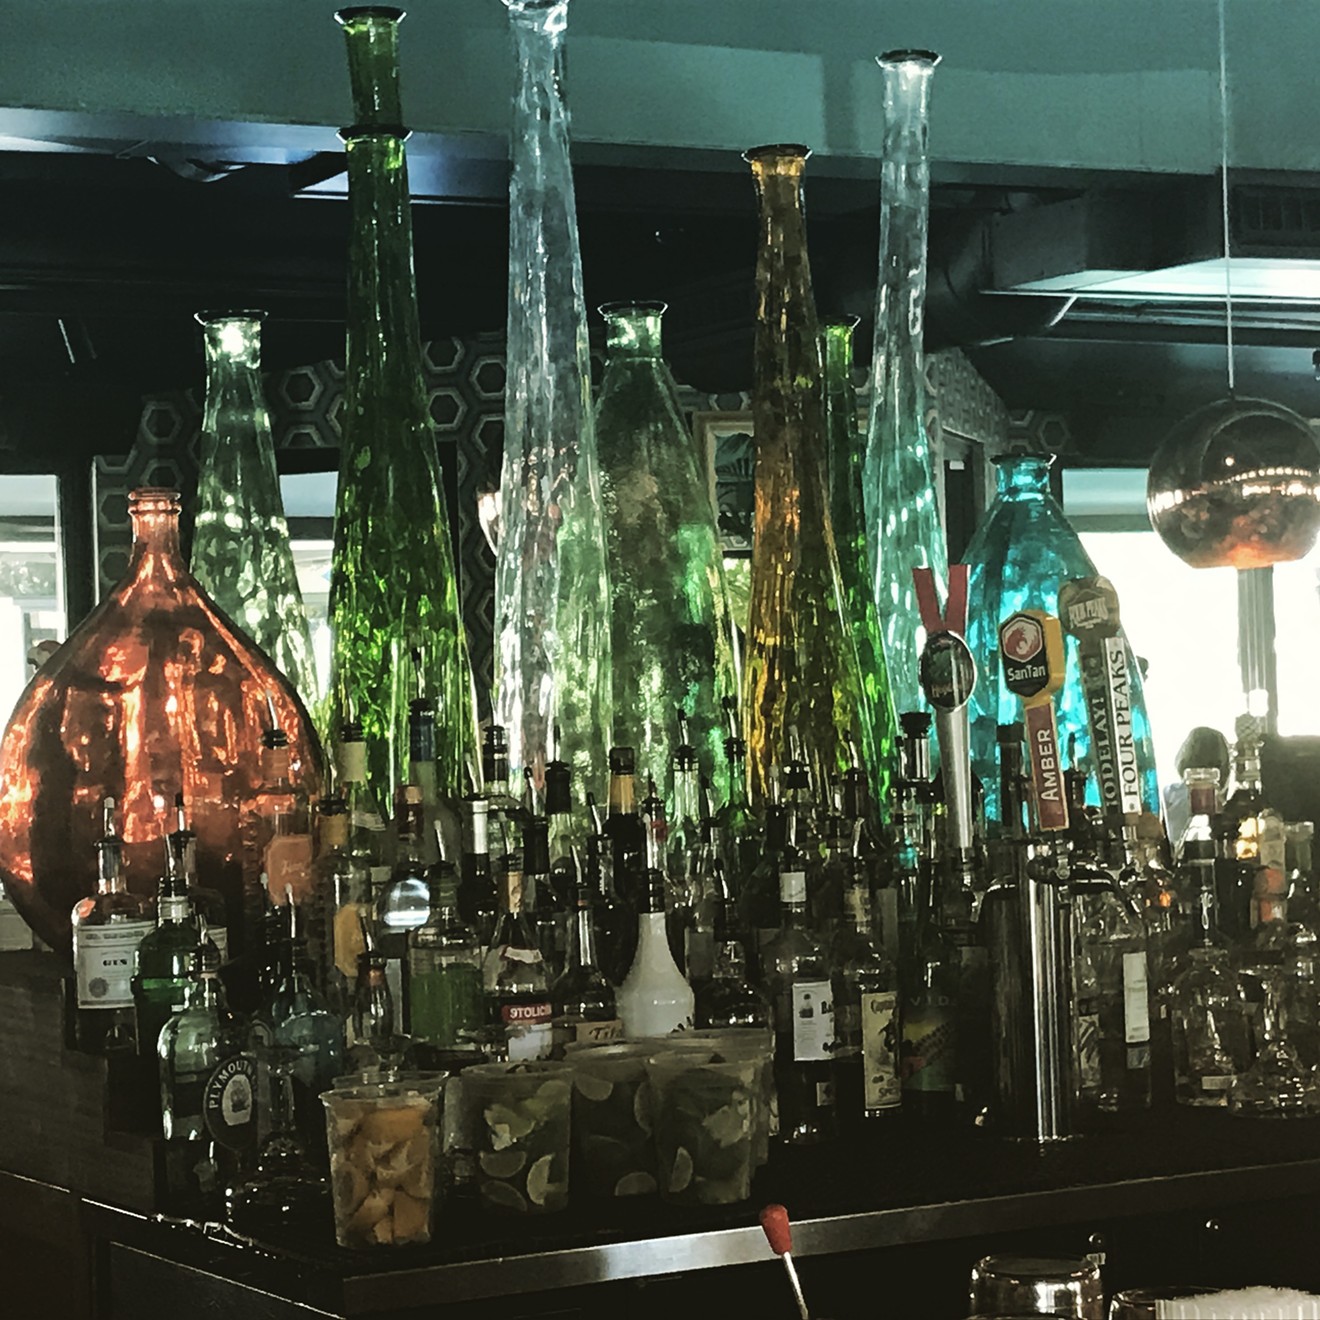 Clear and colorful bottles accessorize the middle of the bar which leads to the fun and festive atmosphere during happy hour.